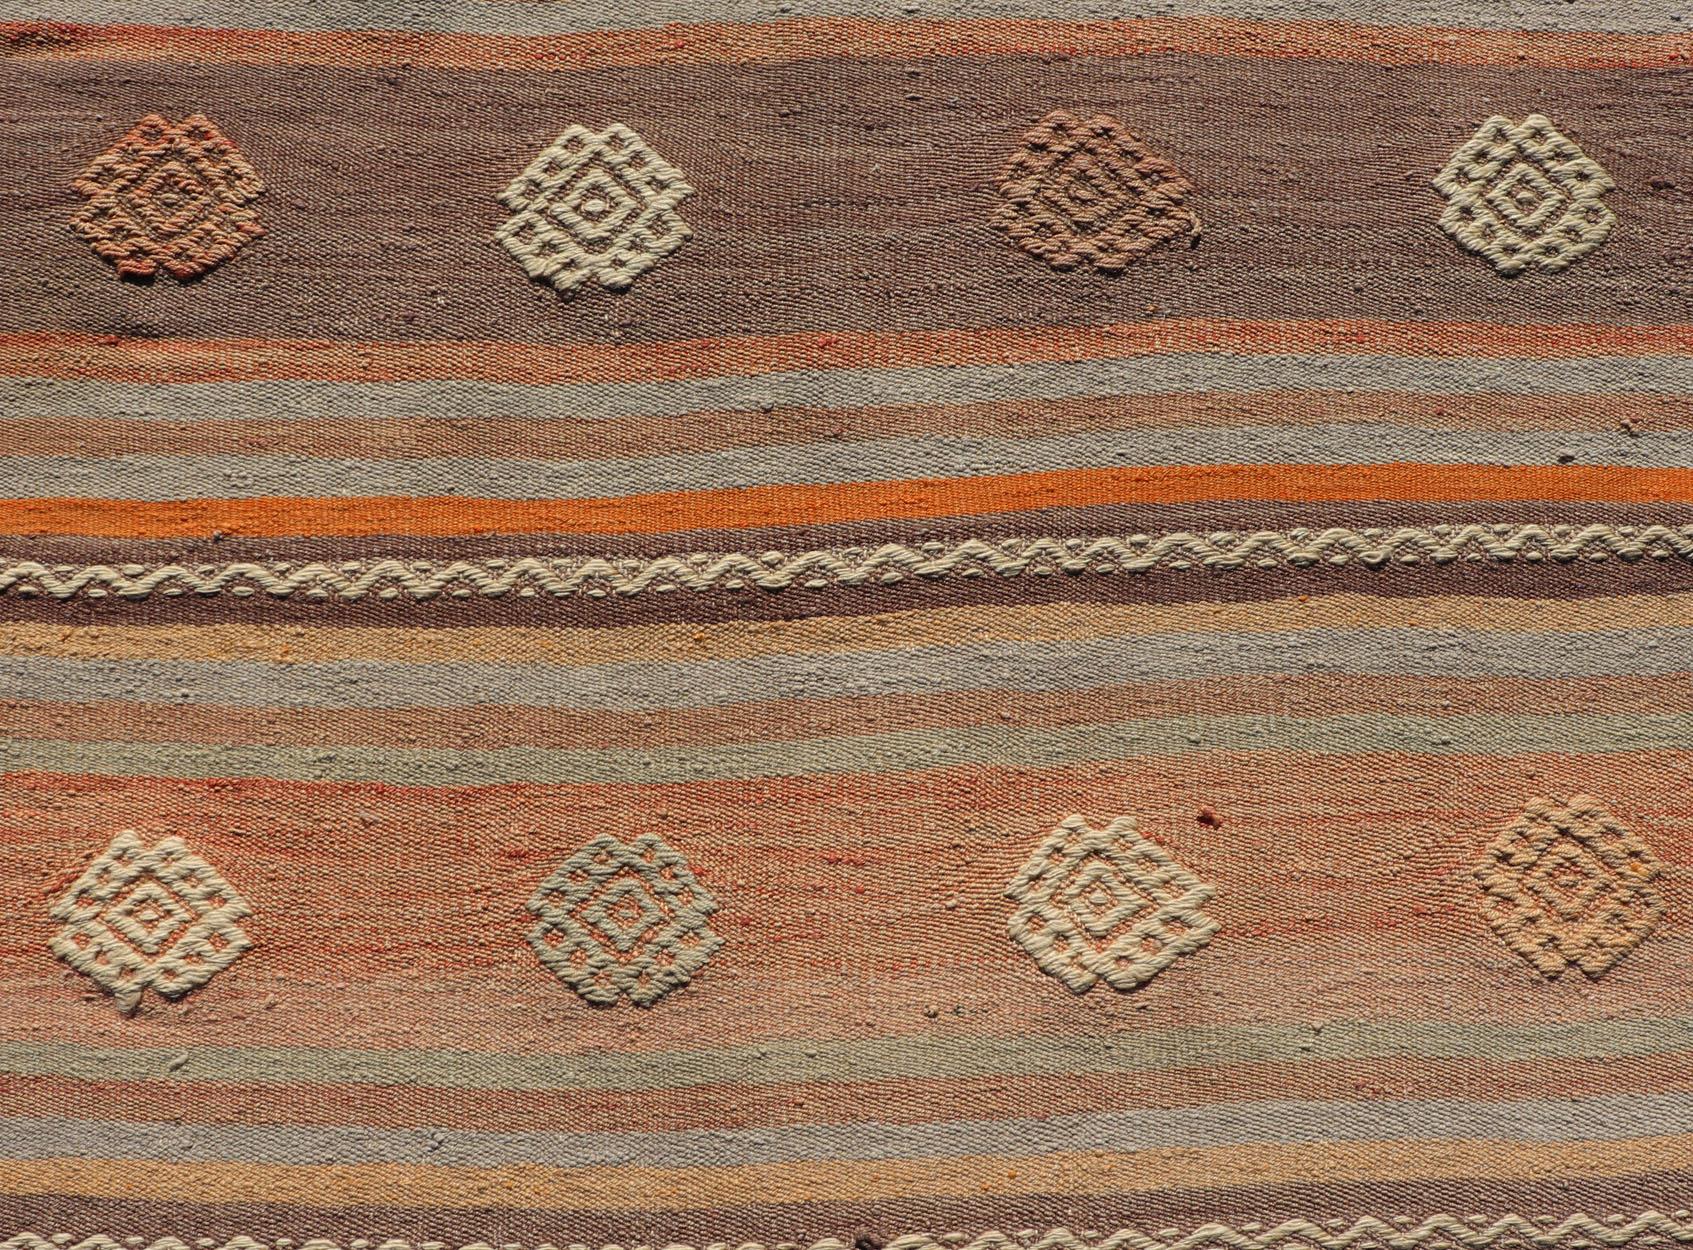 Measures: 3'4 x 11'3
Turkish Vintage Flat-Weave Kilim in Muted Colors with Stripes and Embroideries. Keivan Woven Arts: rug TU-NED-5011 / mid 20th century Turkey. 

This charming vintage flat weave Kilim was hand woven in Turkey during the 1950s.